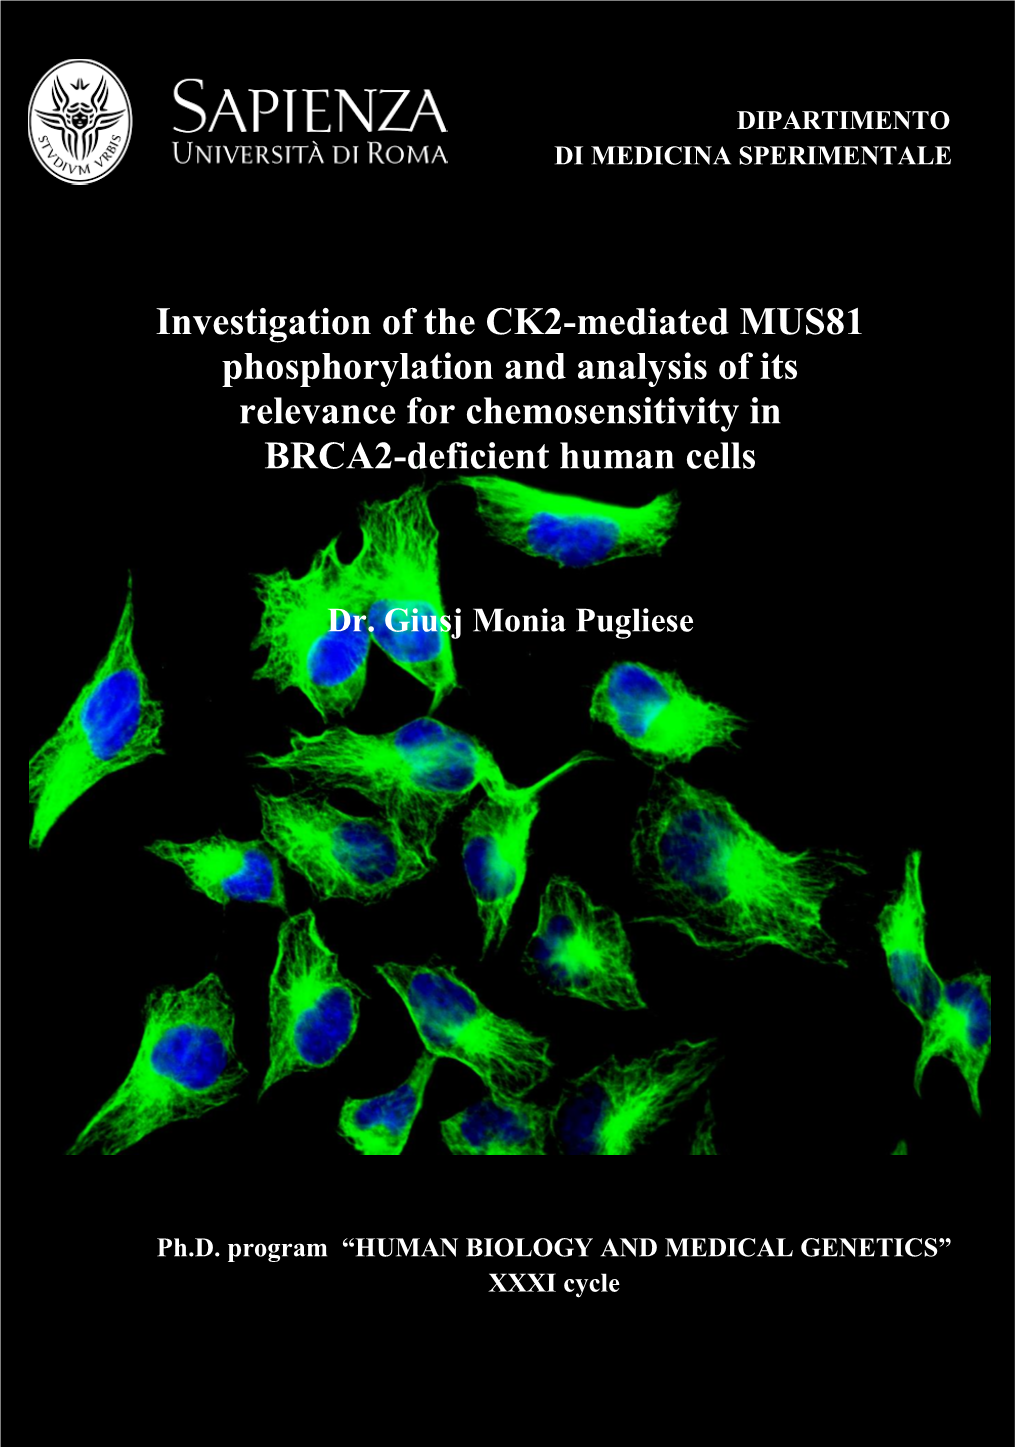 Investigation of the CK2-Mediated MUS81 Phosphorylation and Analysis of Its Relevance for Chemosensitivity in BRCA2-Deficient Human Cells